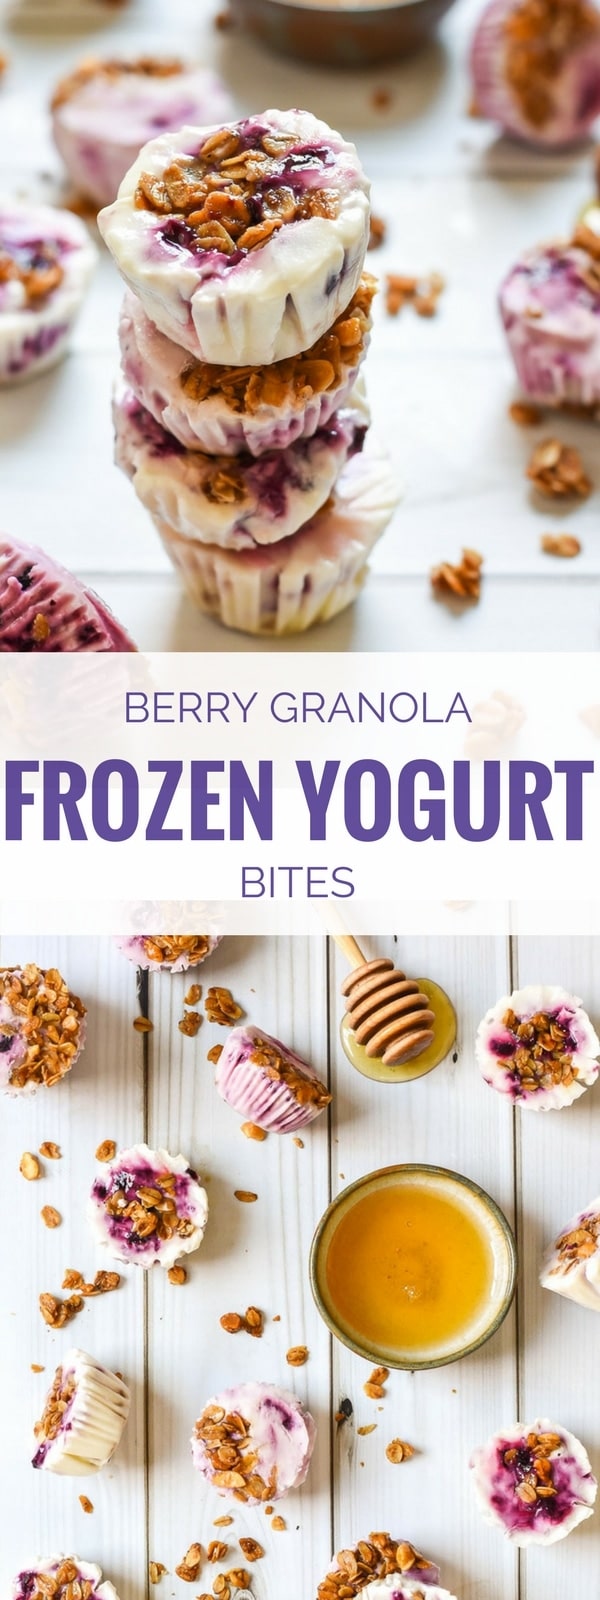 Berry Frozen Yogurt Bites swirled with berries and granola make a great healthy treat for summer!